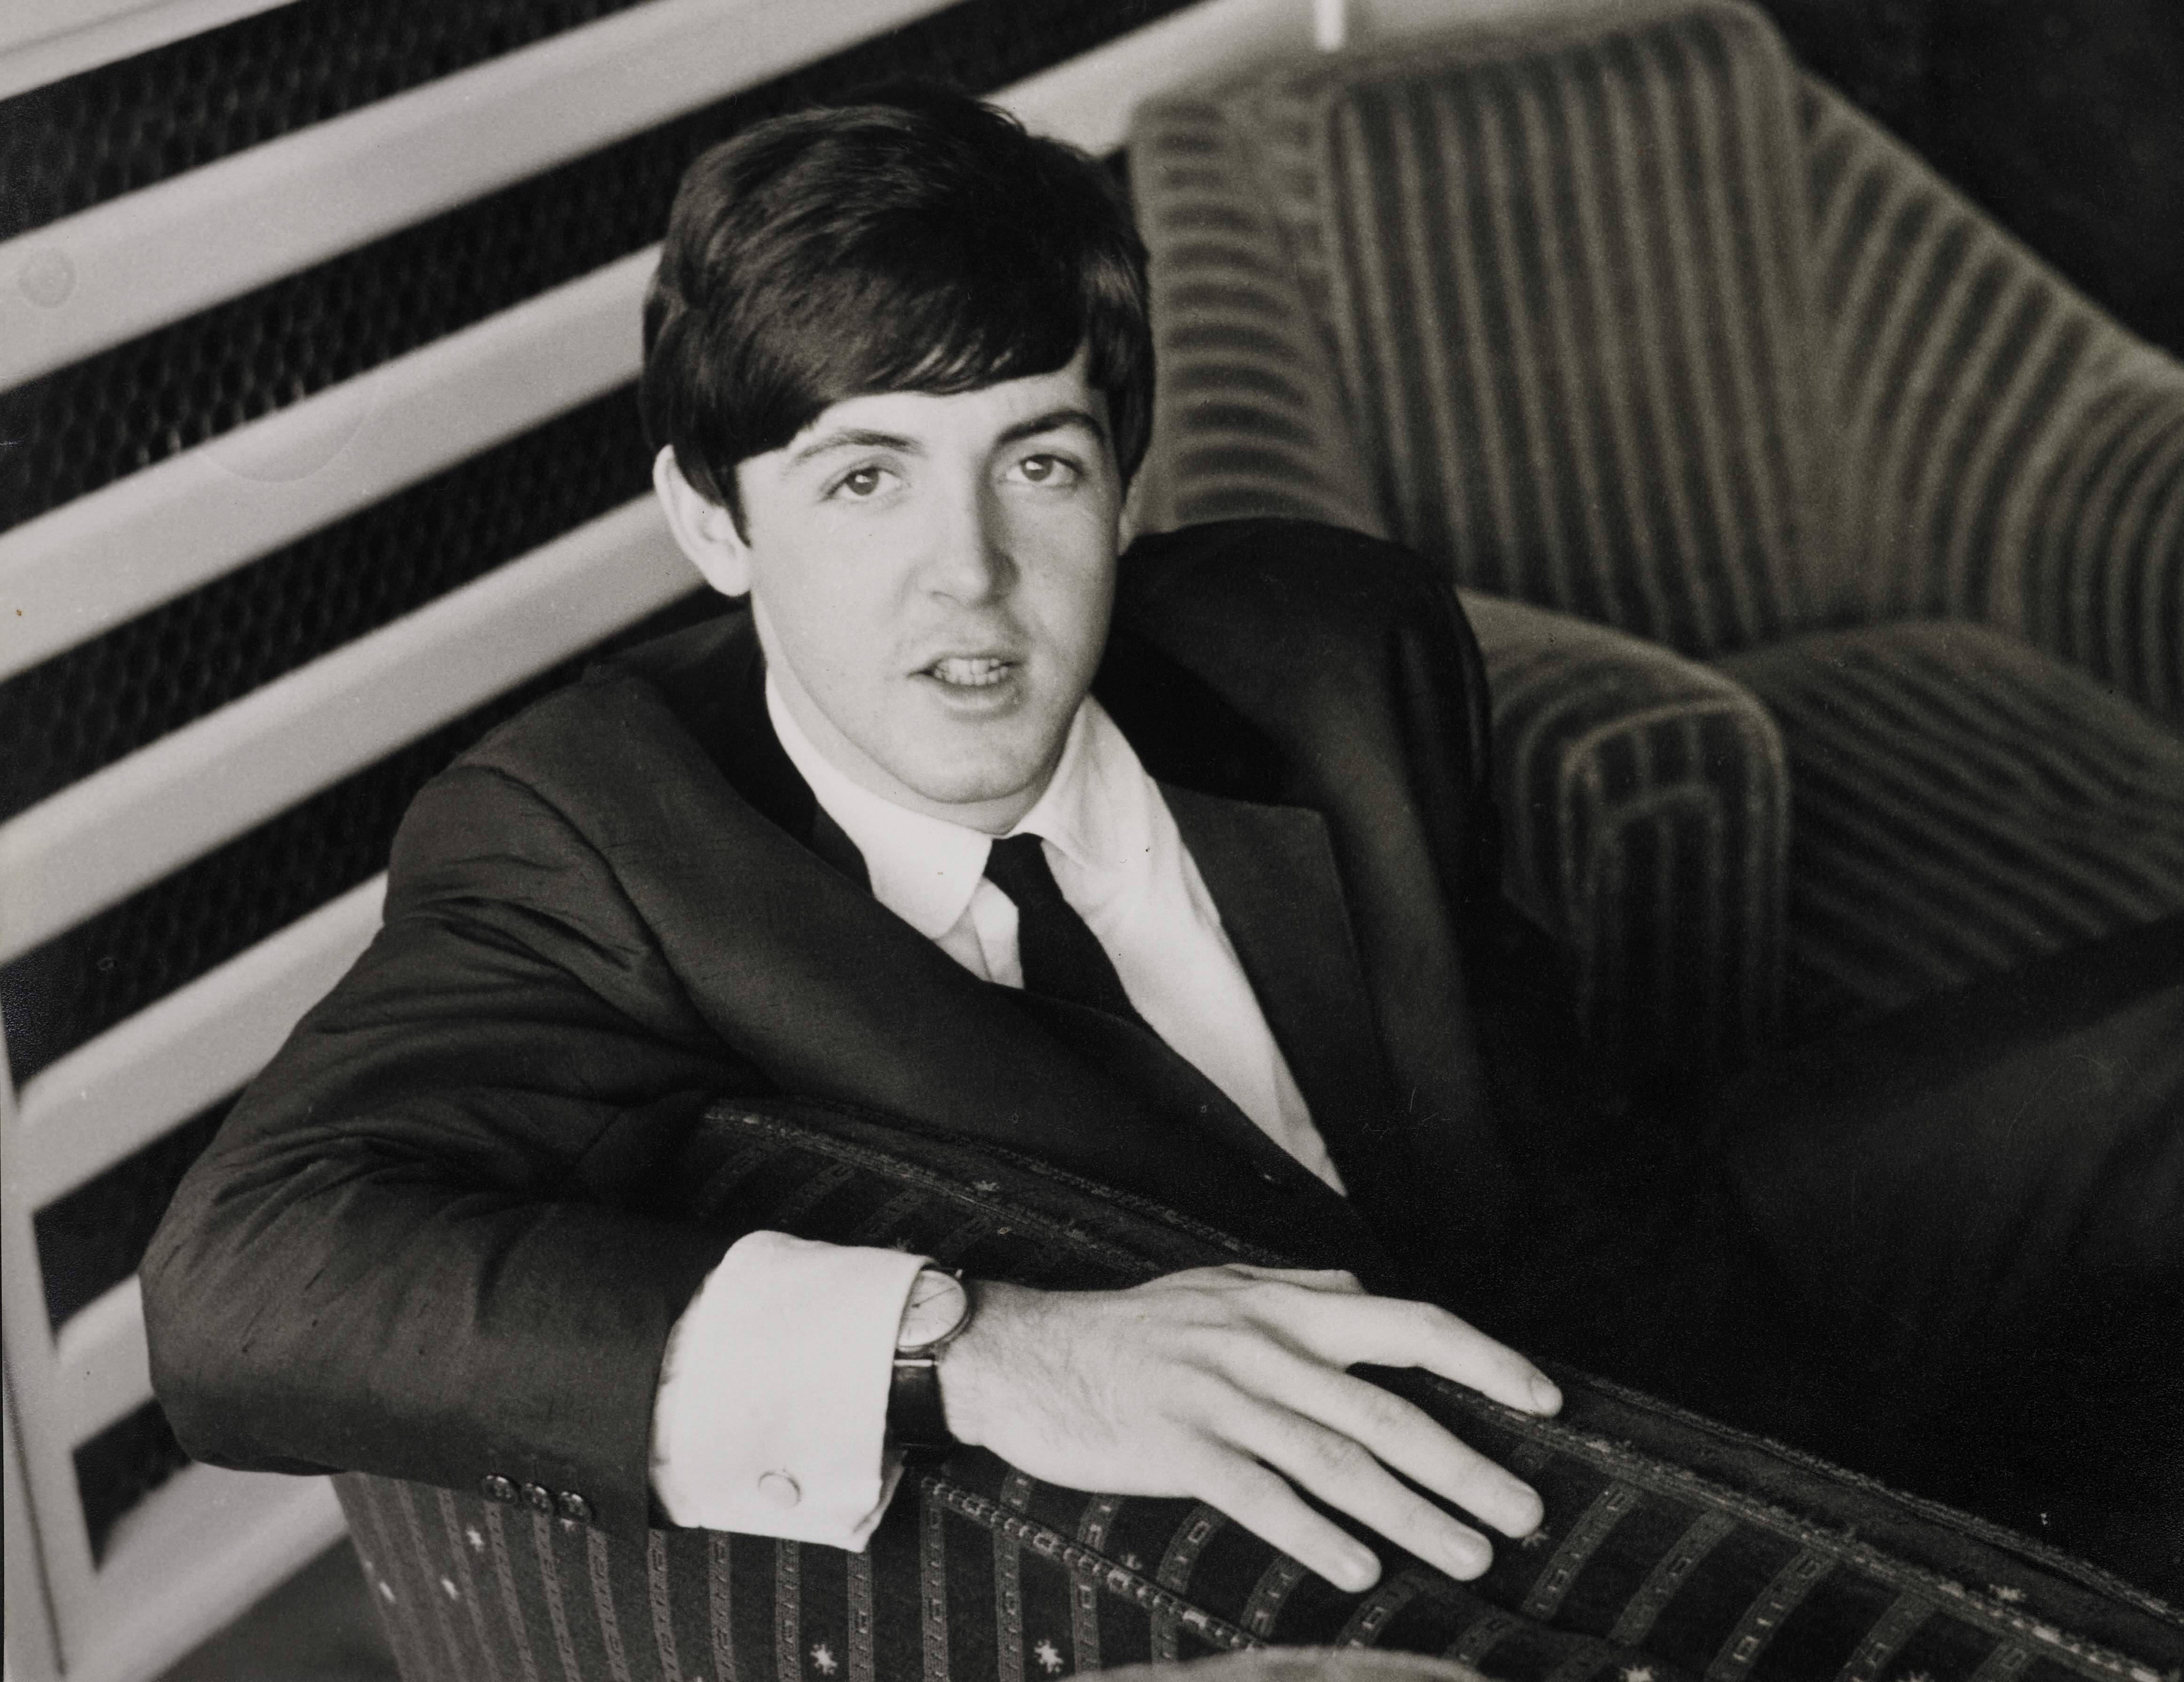 Paul McCartney in a chart during The Beatles' "Hey Jude" era